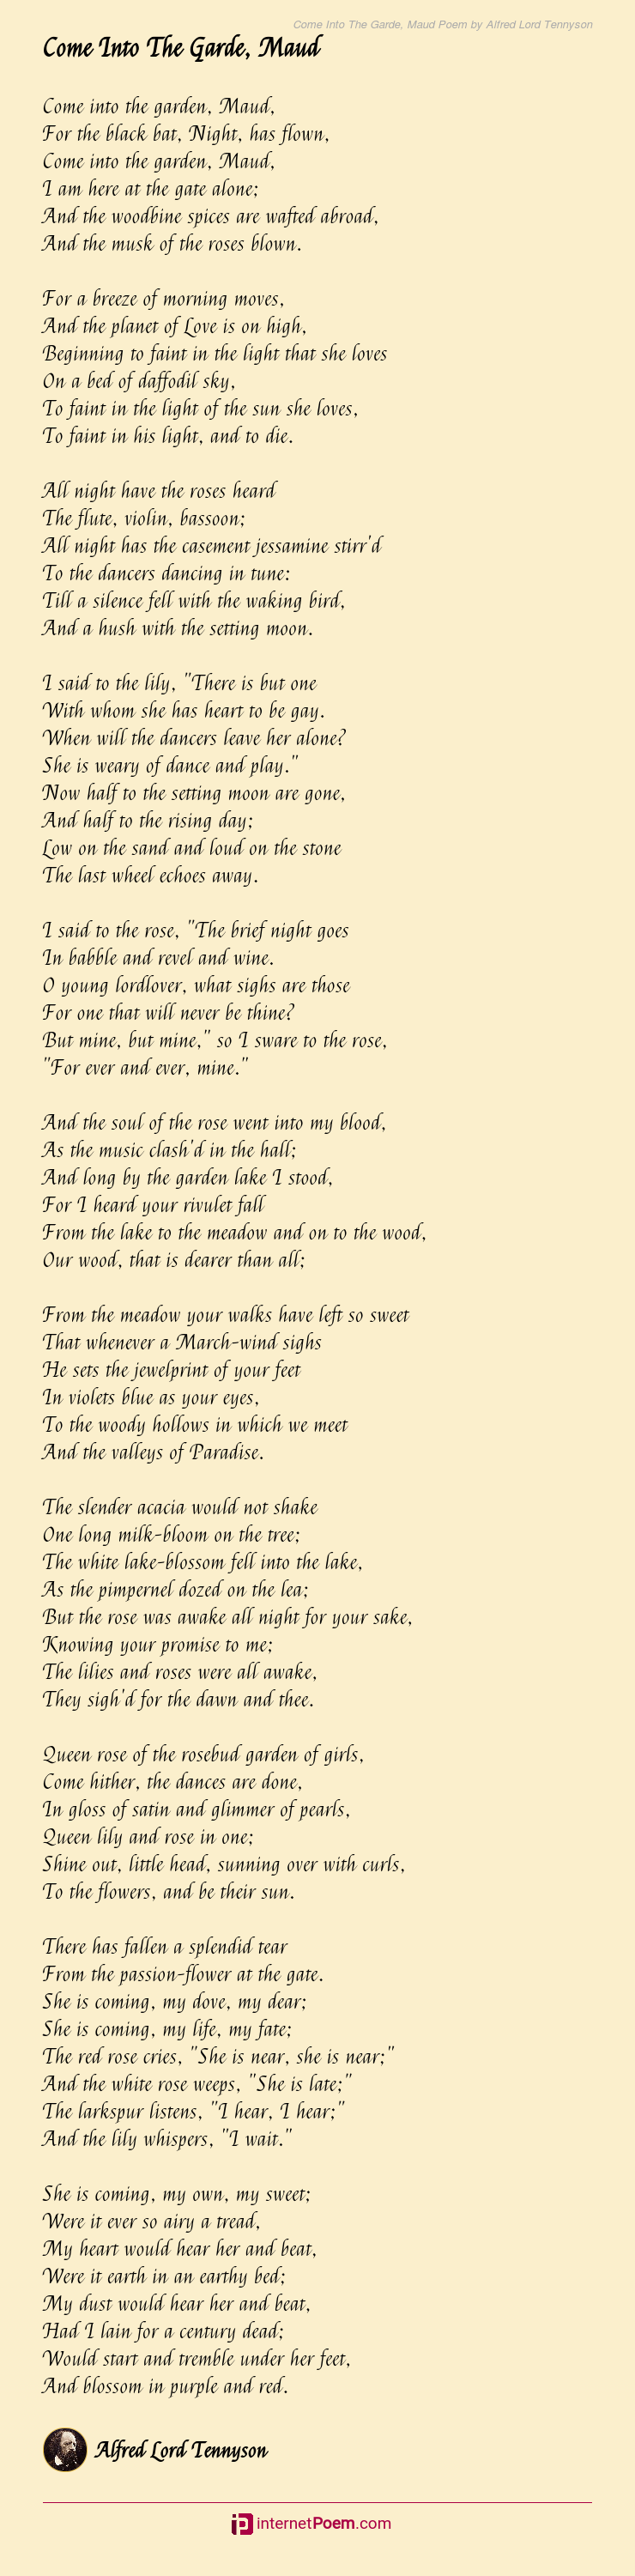 Come Into The Garde Maud Poem By Alfred Lord Tennyson